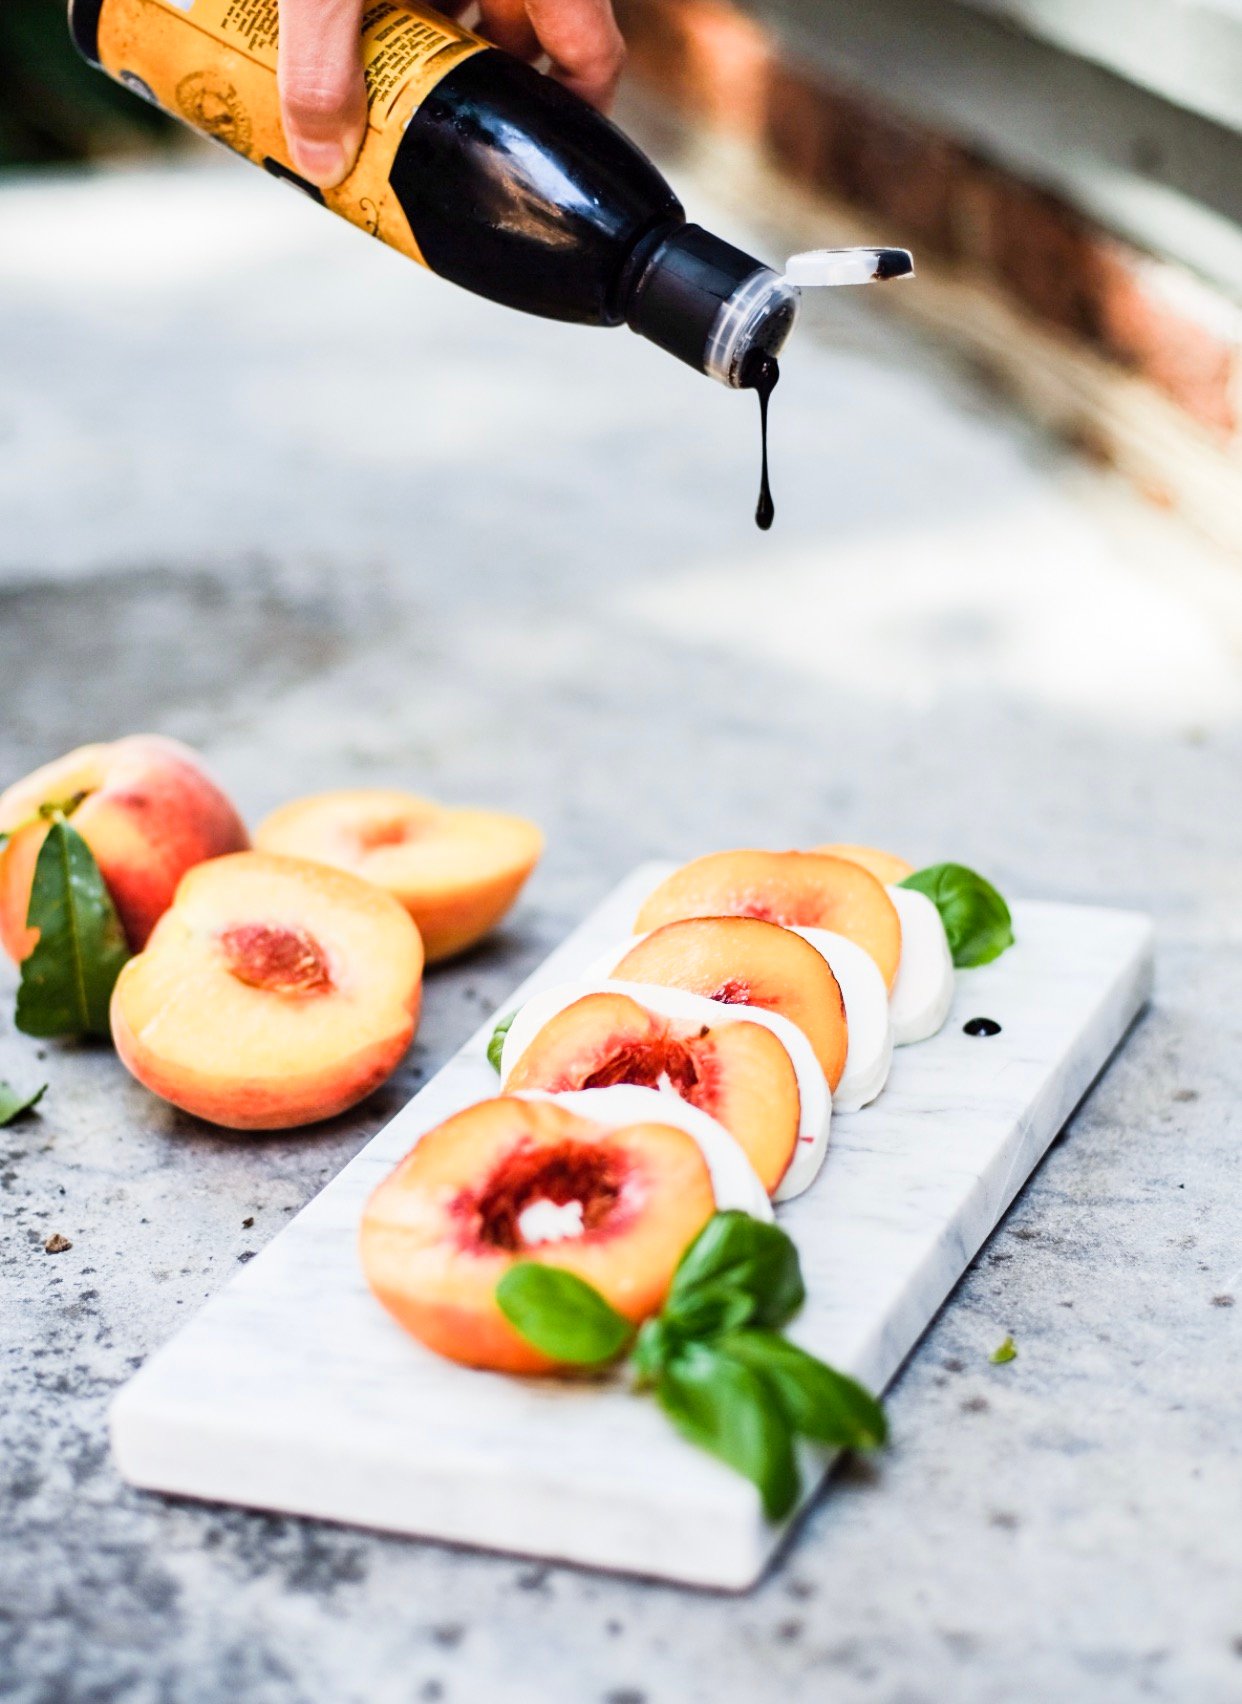 Lifestyle Blogger Chocolate and Lace shares her recipe for Peach Caprese Salad